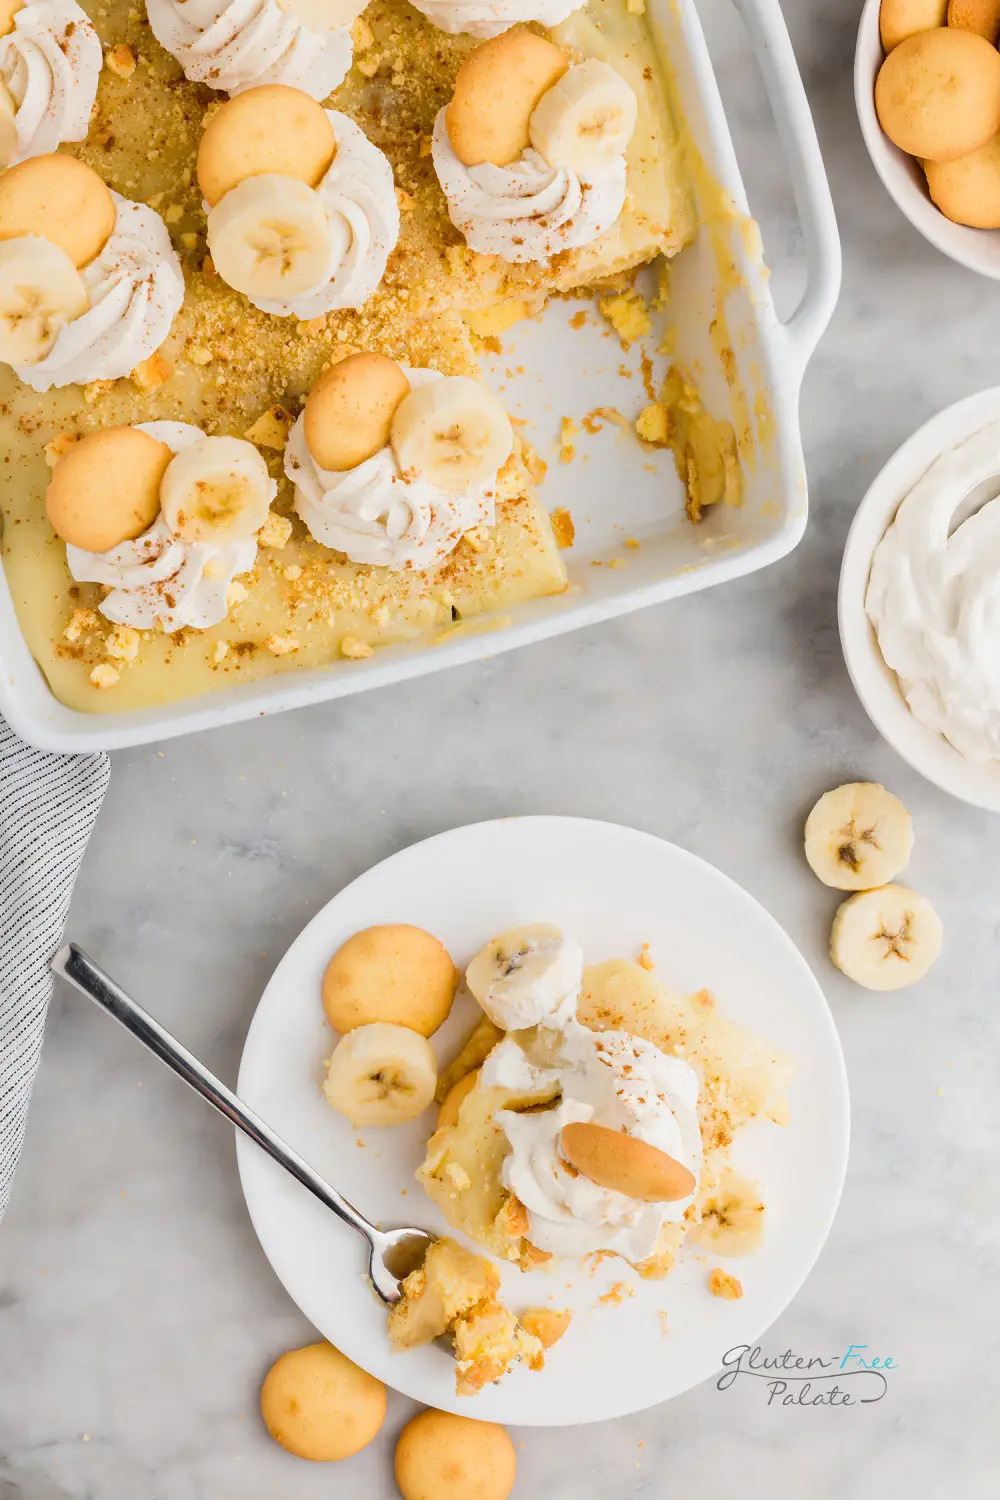 gluten free banana pudding on a white plate next to a pan of gluten free banana pudding